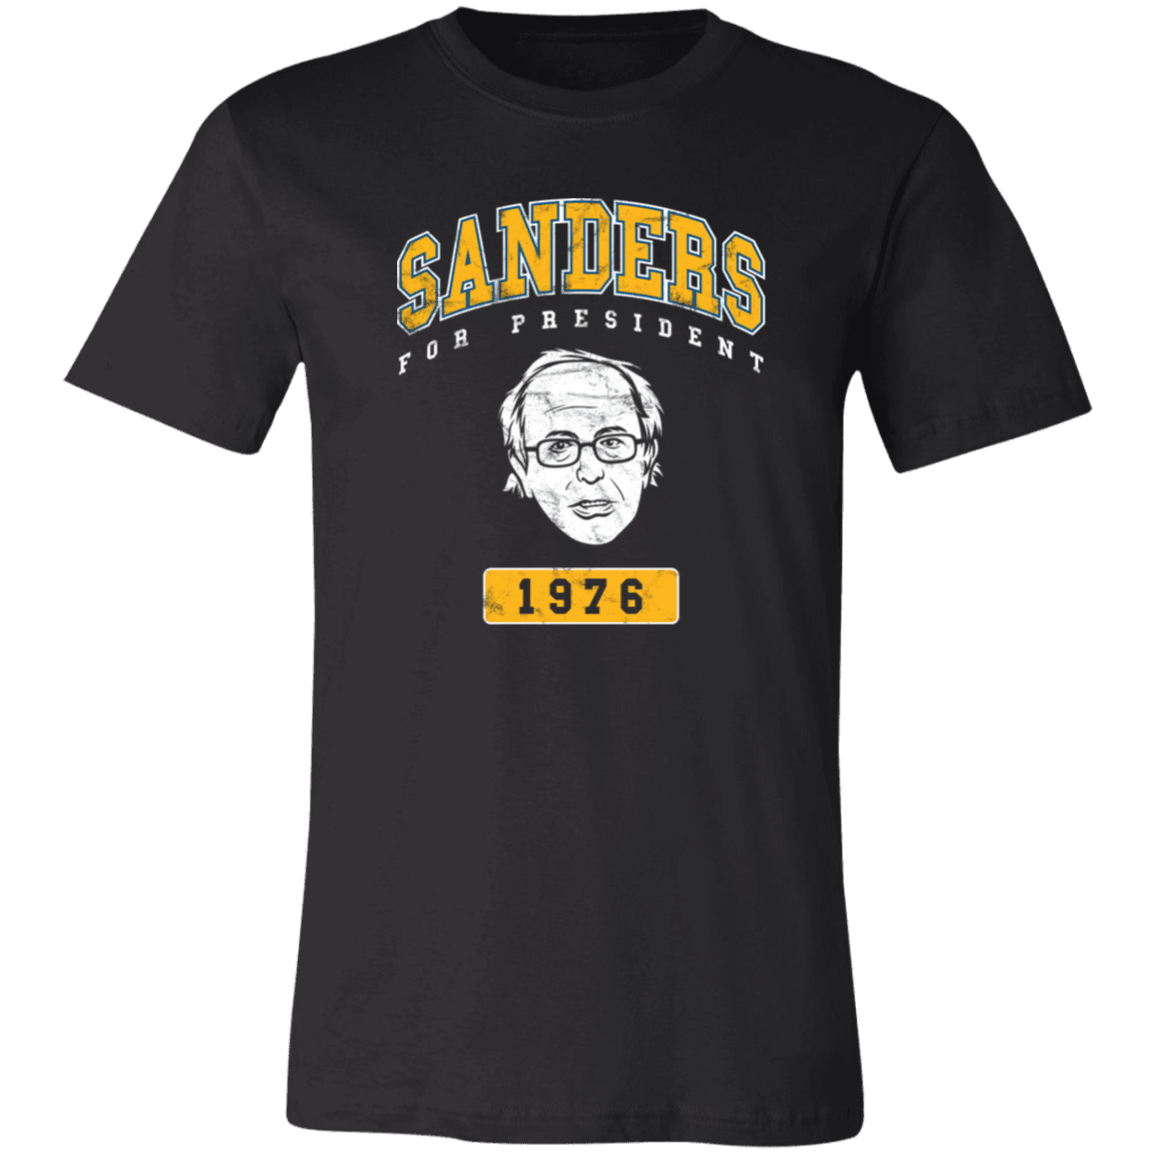 Designs by MyUtopia Shout Out:Sanders for President Unisex Jersey Short-Sleeve T-Shirt,X-Small / Black,Adult Unisex T-Shirt